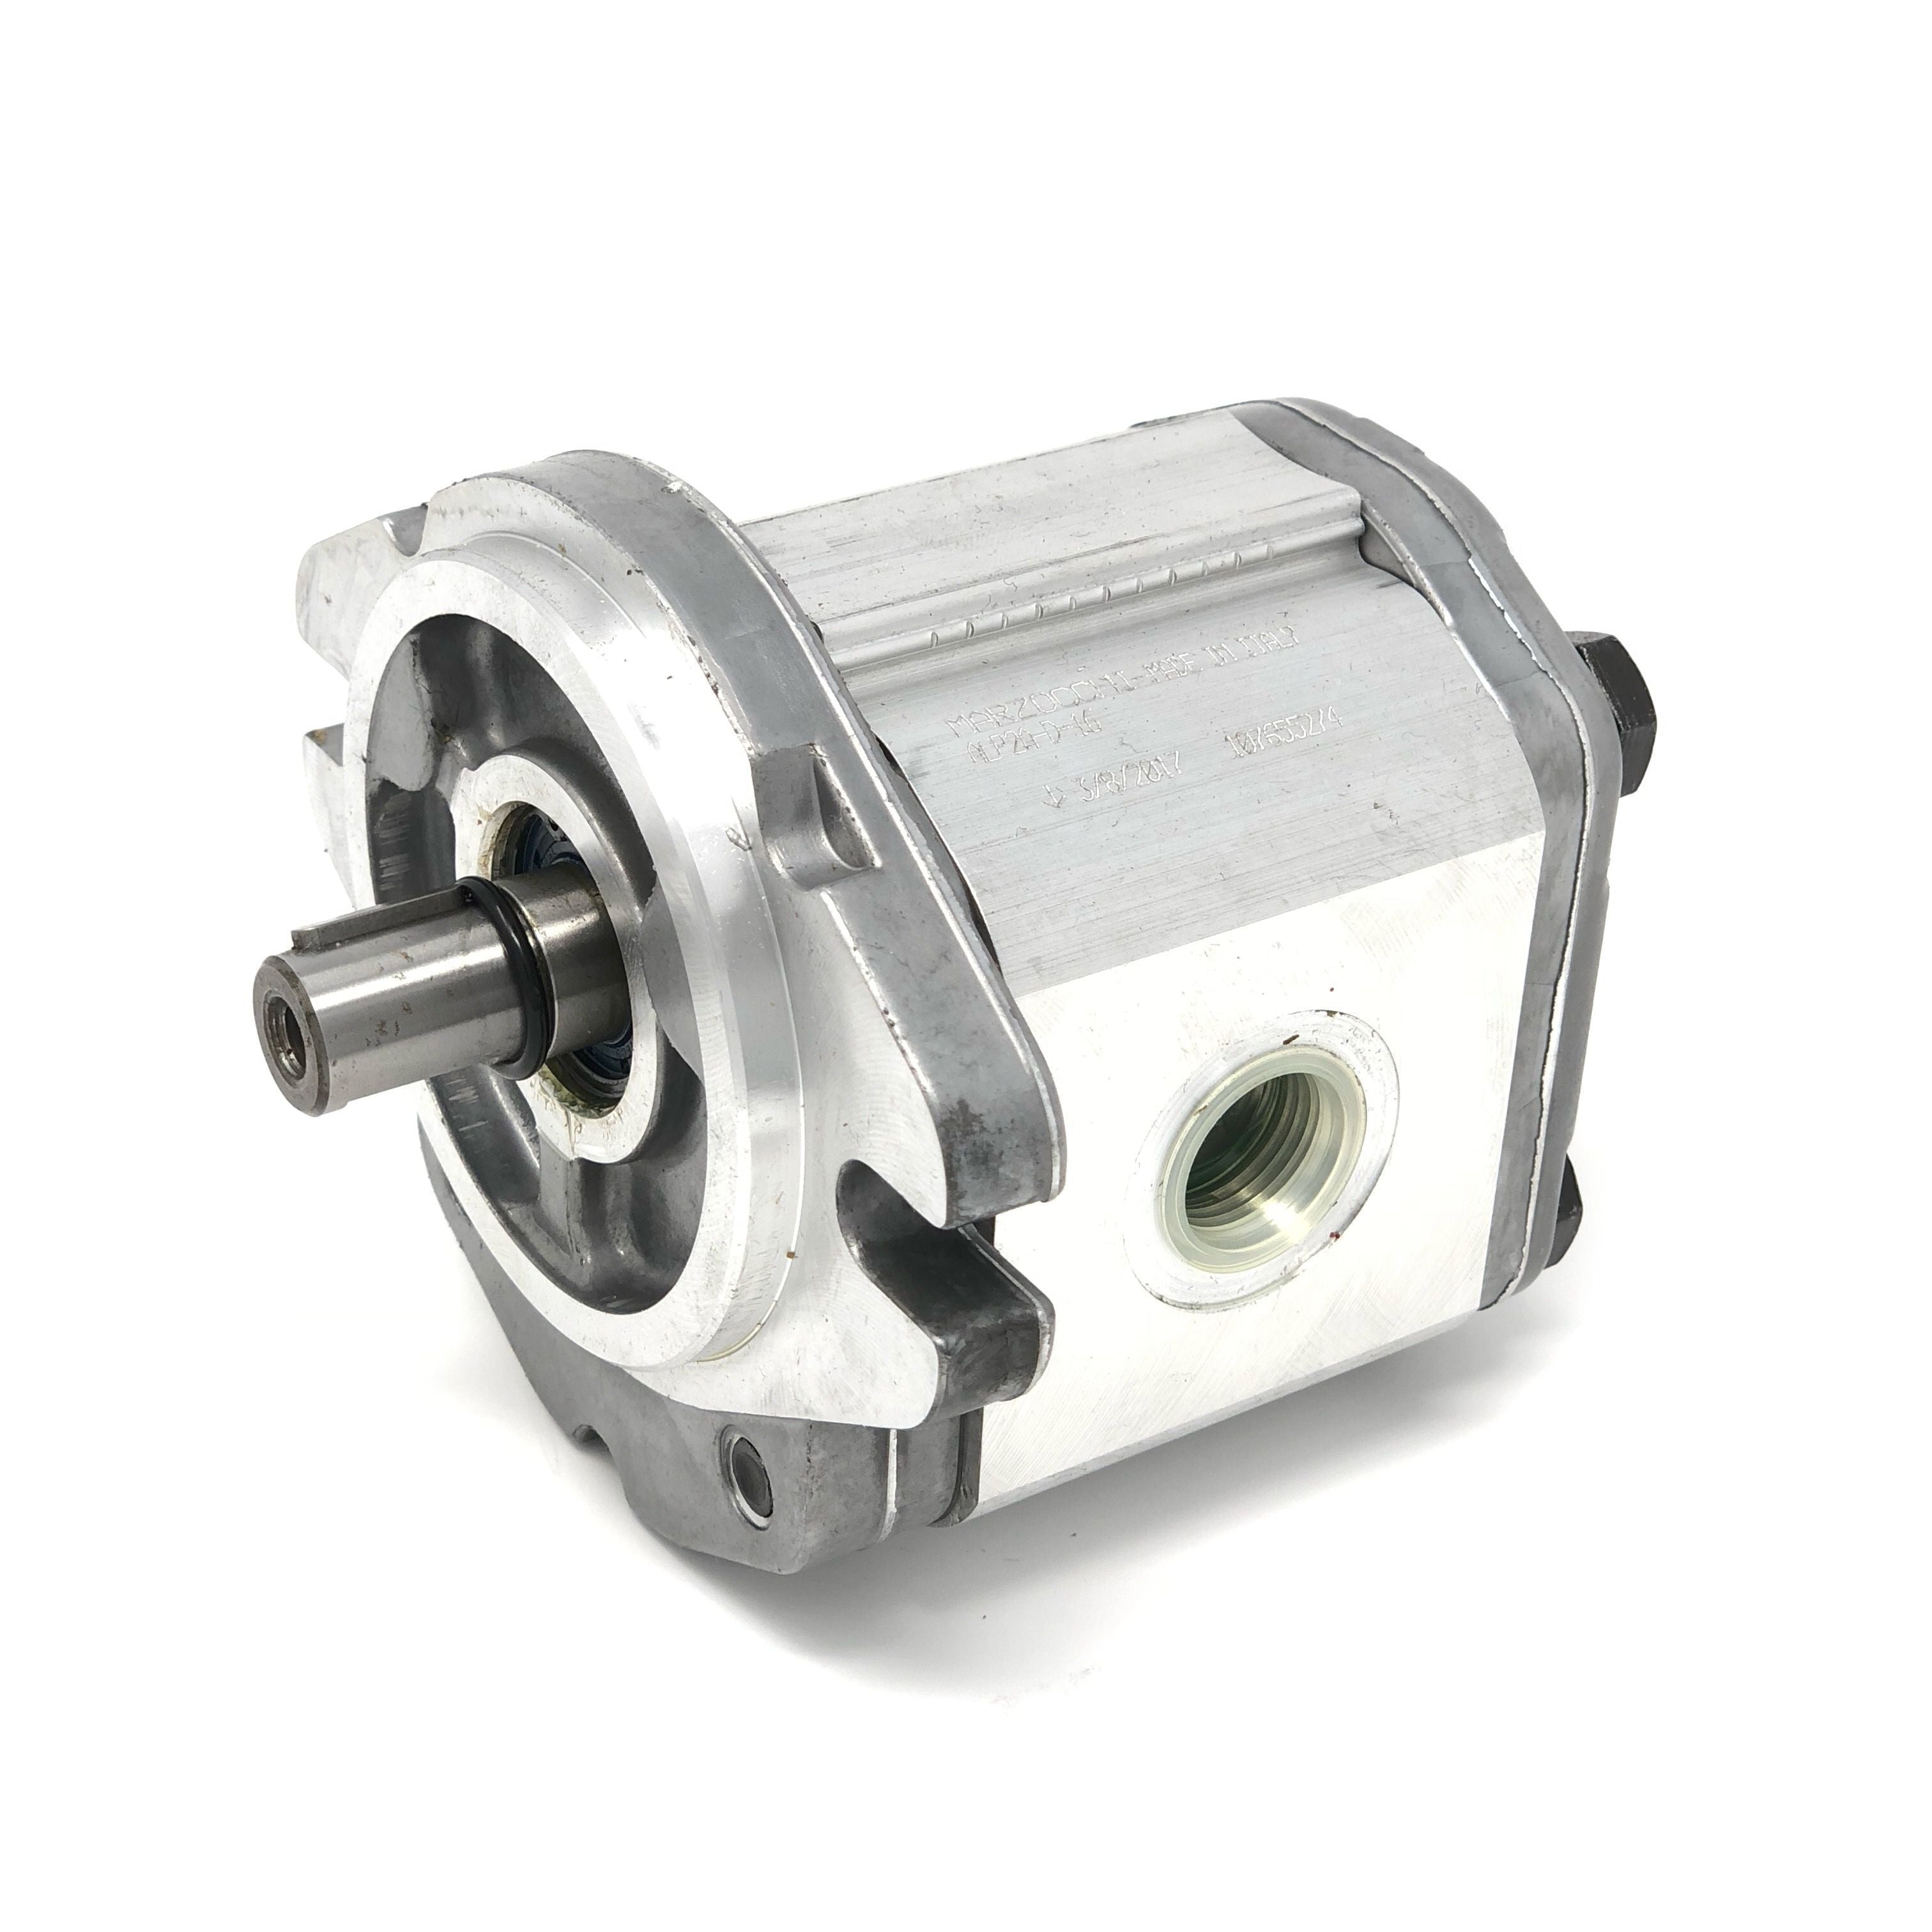 ALP1A-D-3 : Marzocchi Gear Pump, CW, 2.1cc (0.1281in3), 1 GPM, 3625psi, 6000 RPM, #8 SAE (1/2") In, #6 SAE (3/8") Out, Keyed Shaft 1/2" Bore x 1/8" Key, SAE AA 2-Bolt Mount